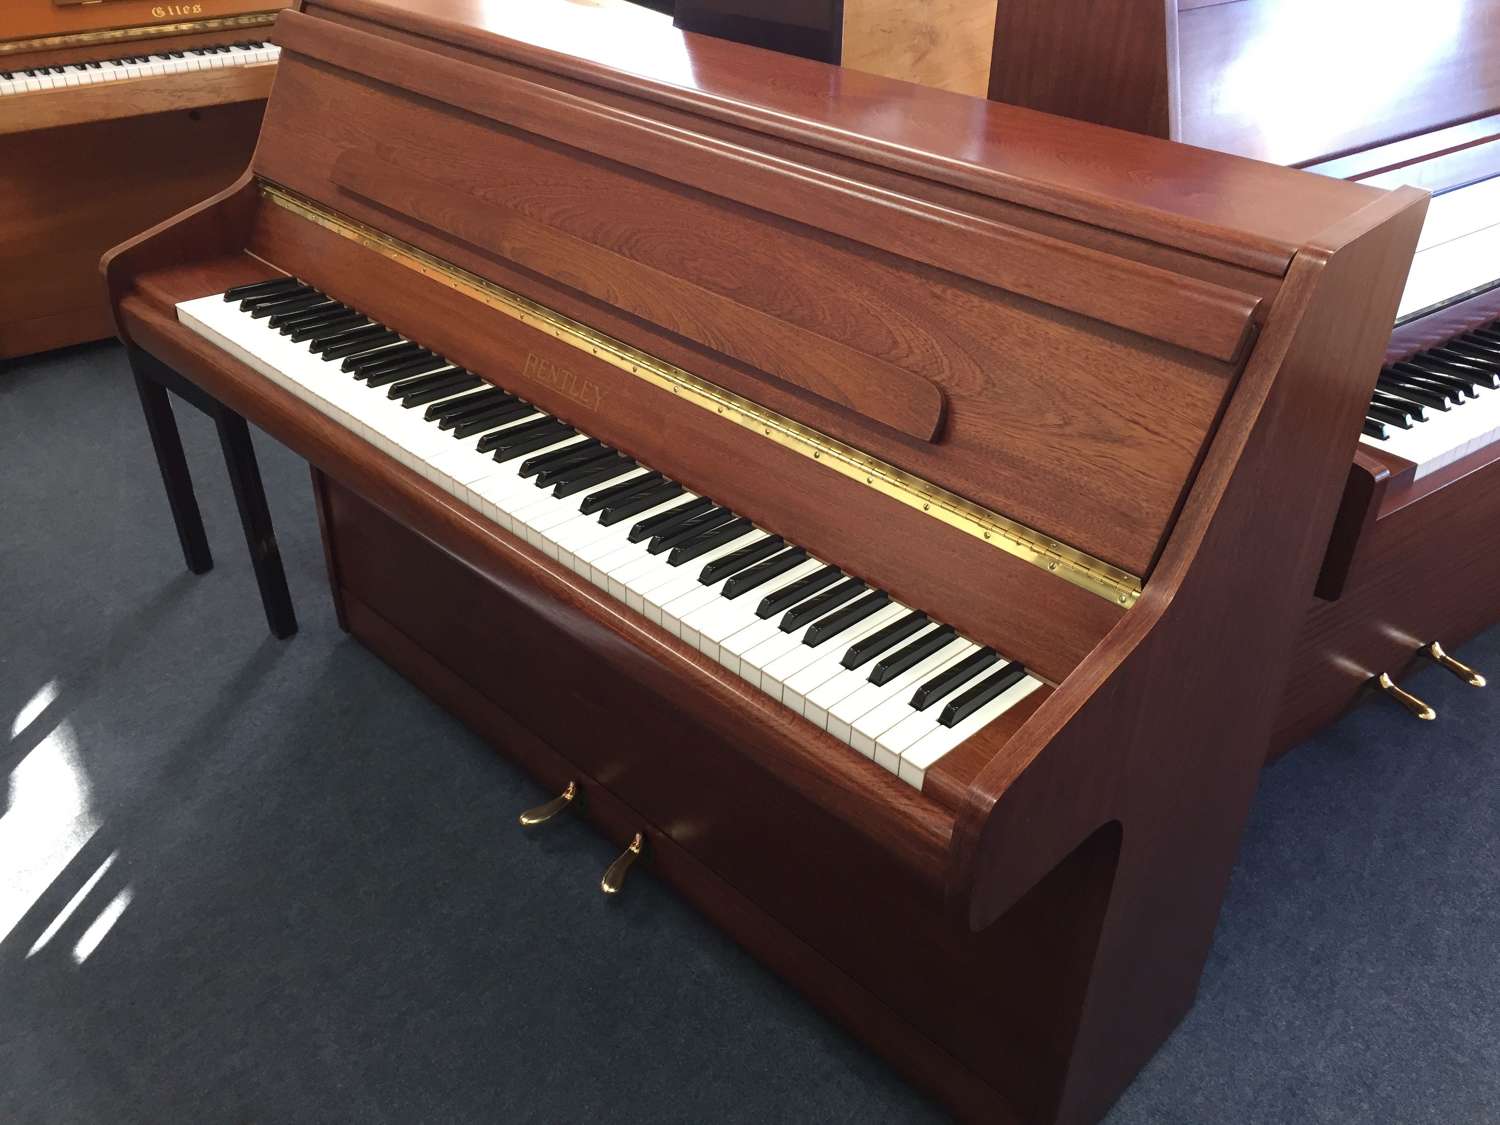 Bentley modern upright piano for sale